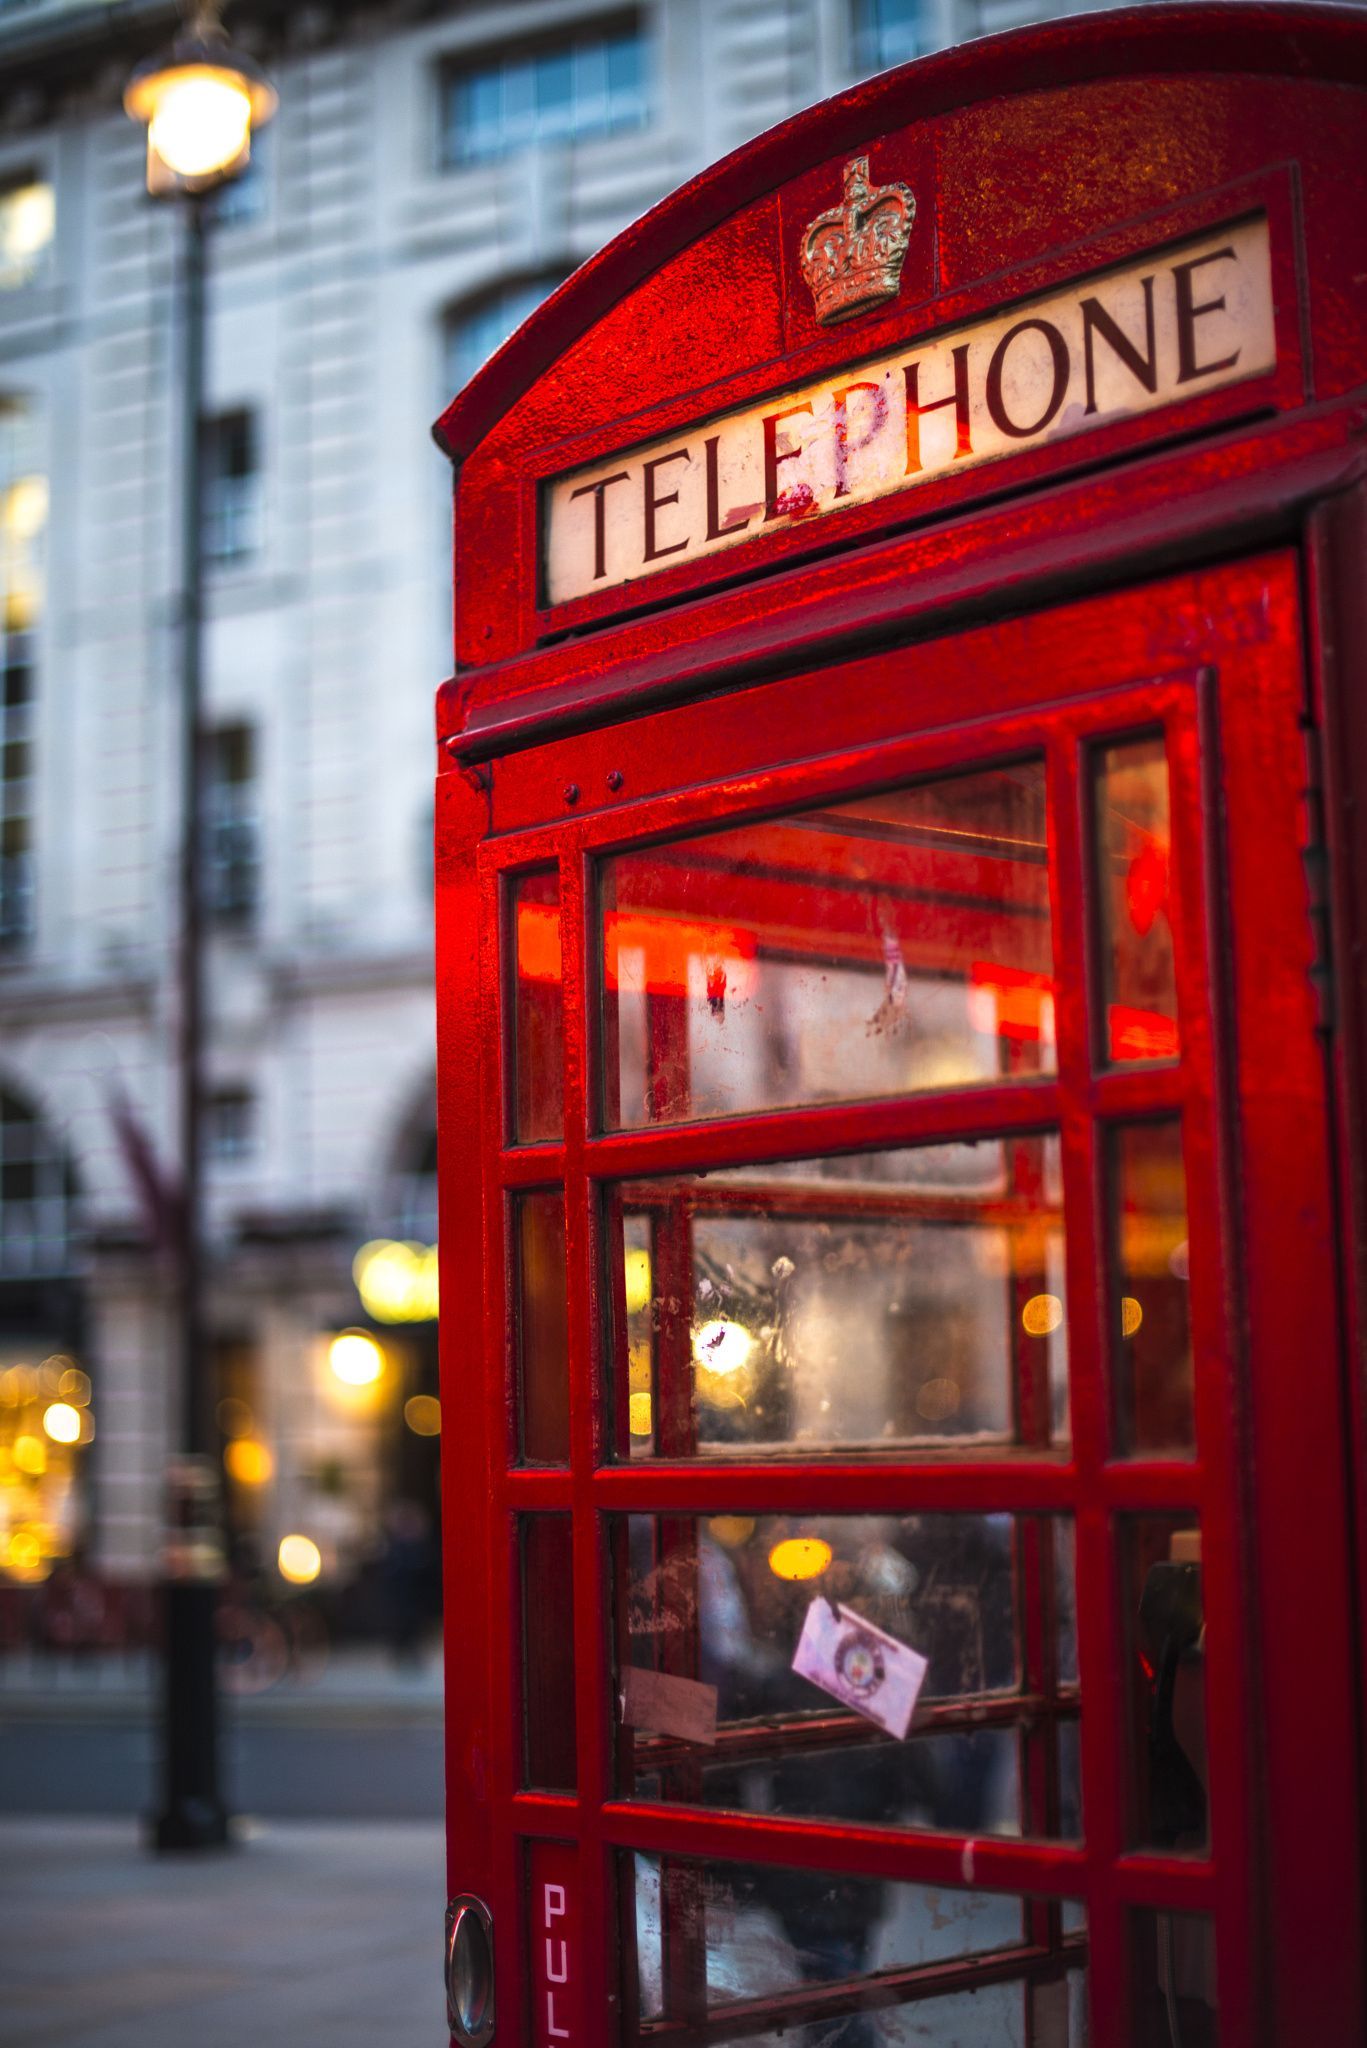 Red Telephone Booth, London. Telephone booth, London telephone booth, London wallpaper